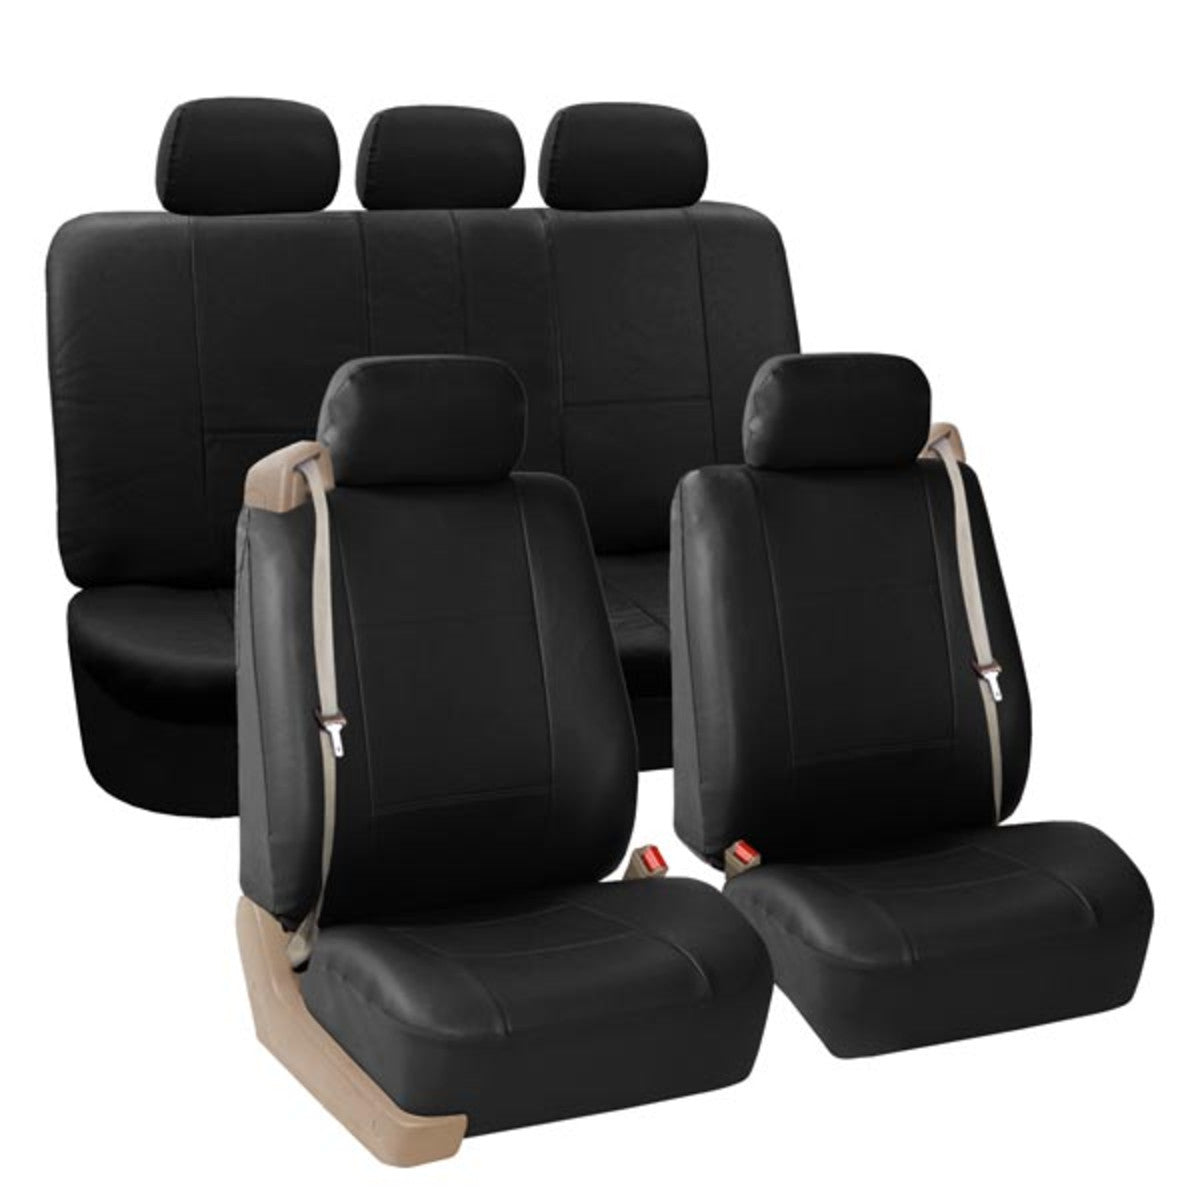 Built-in Seat Belt Compatible PU Leather Seat Covers Black